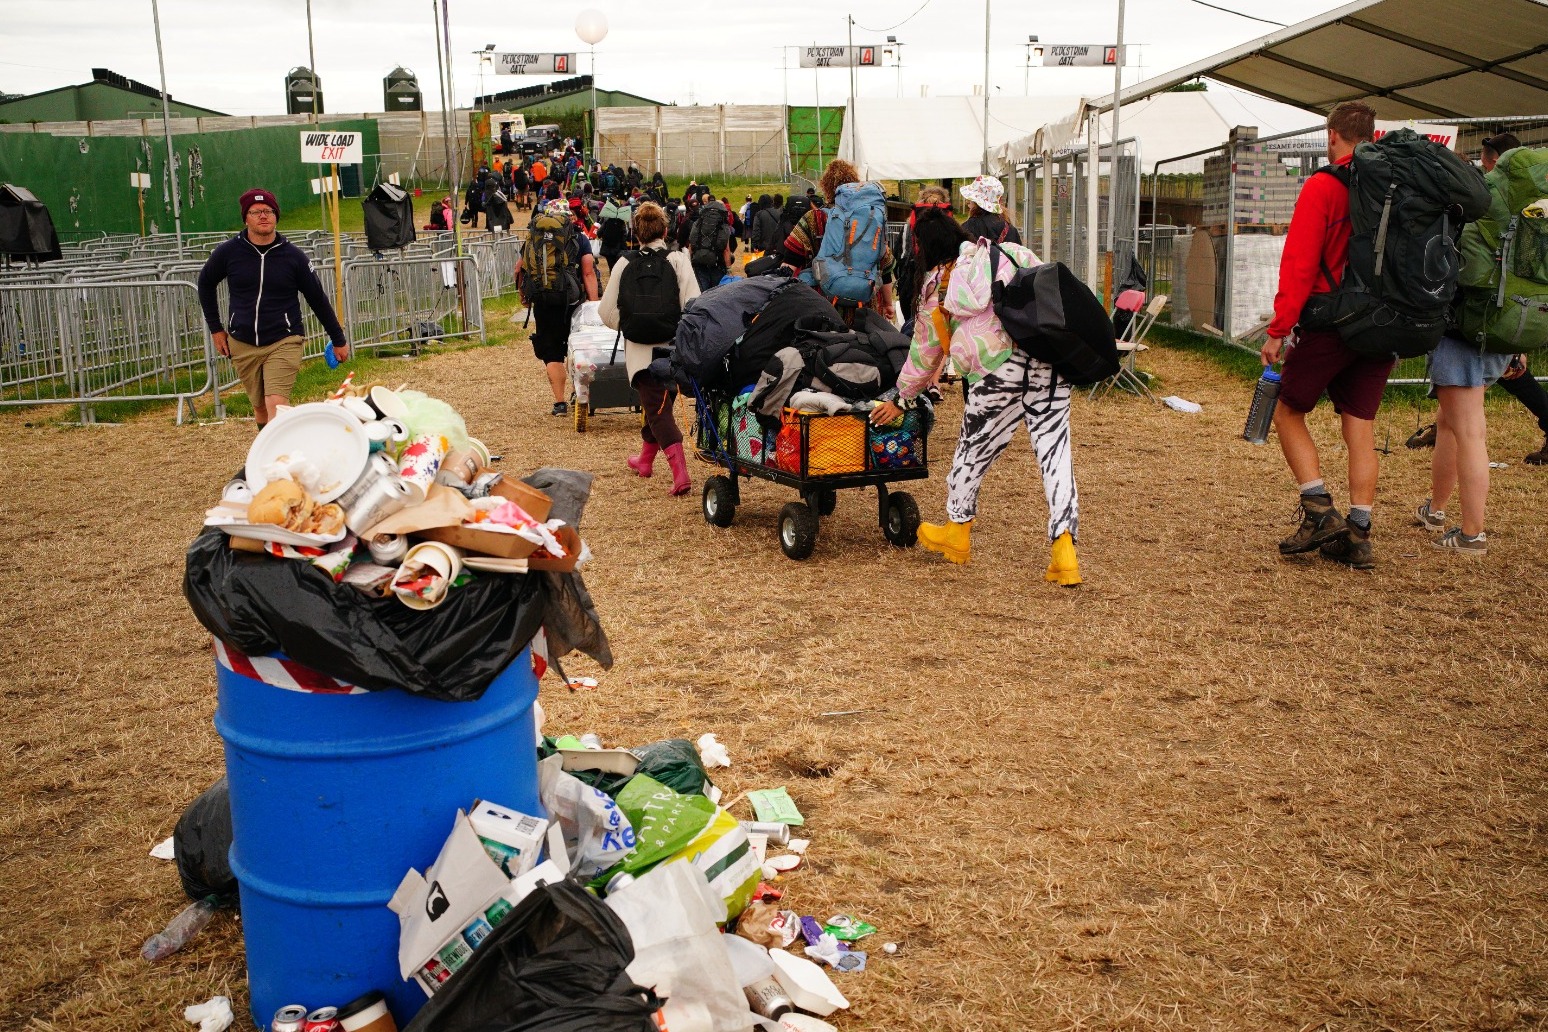 Glastonbury clean up crew kick into action after sun soaked festival